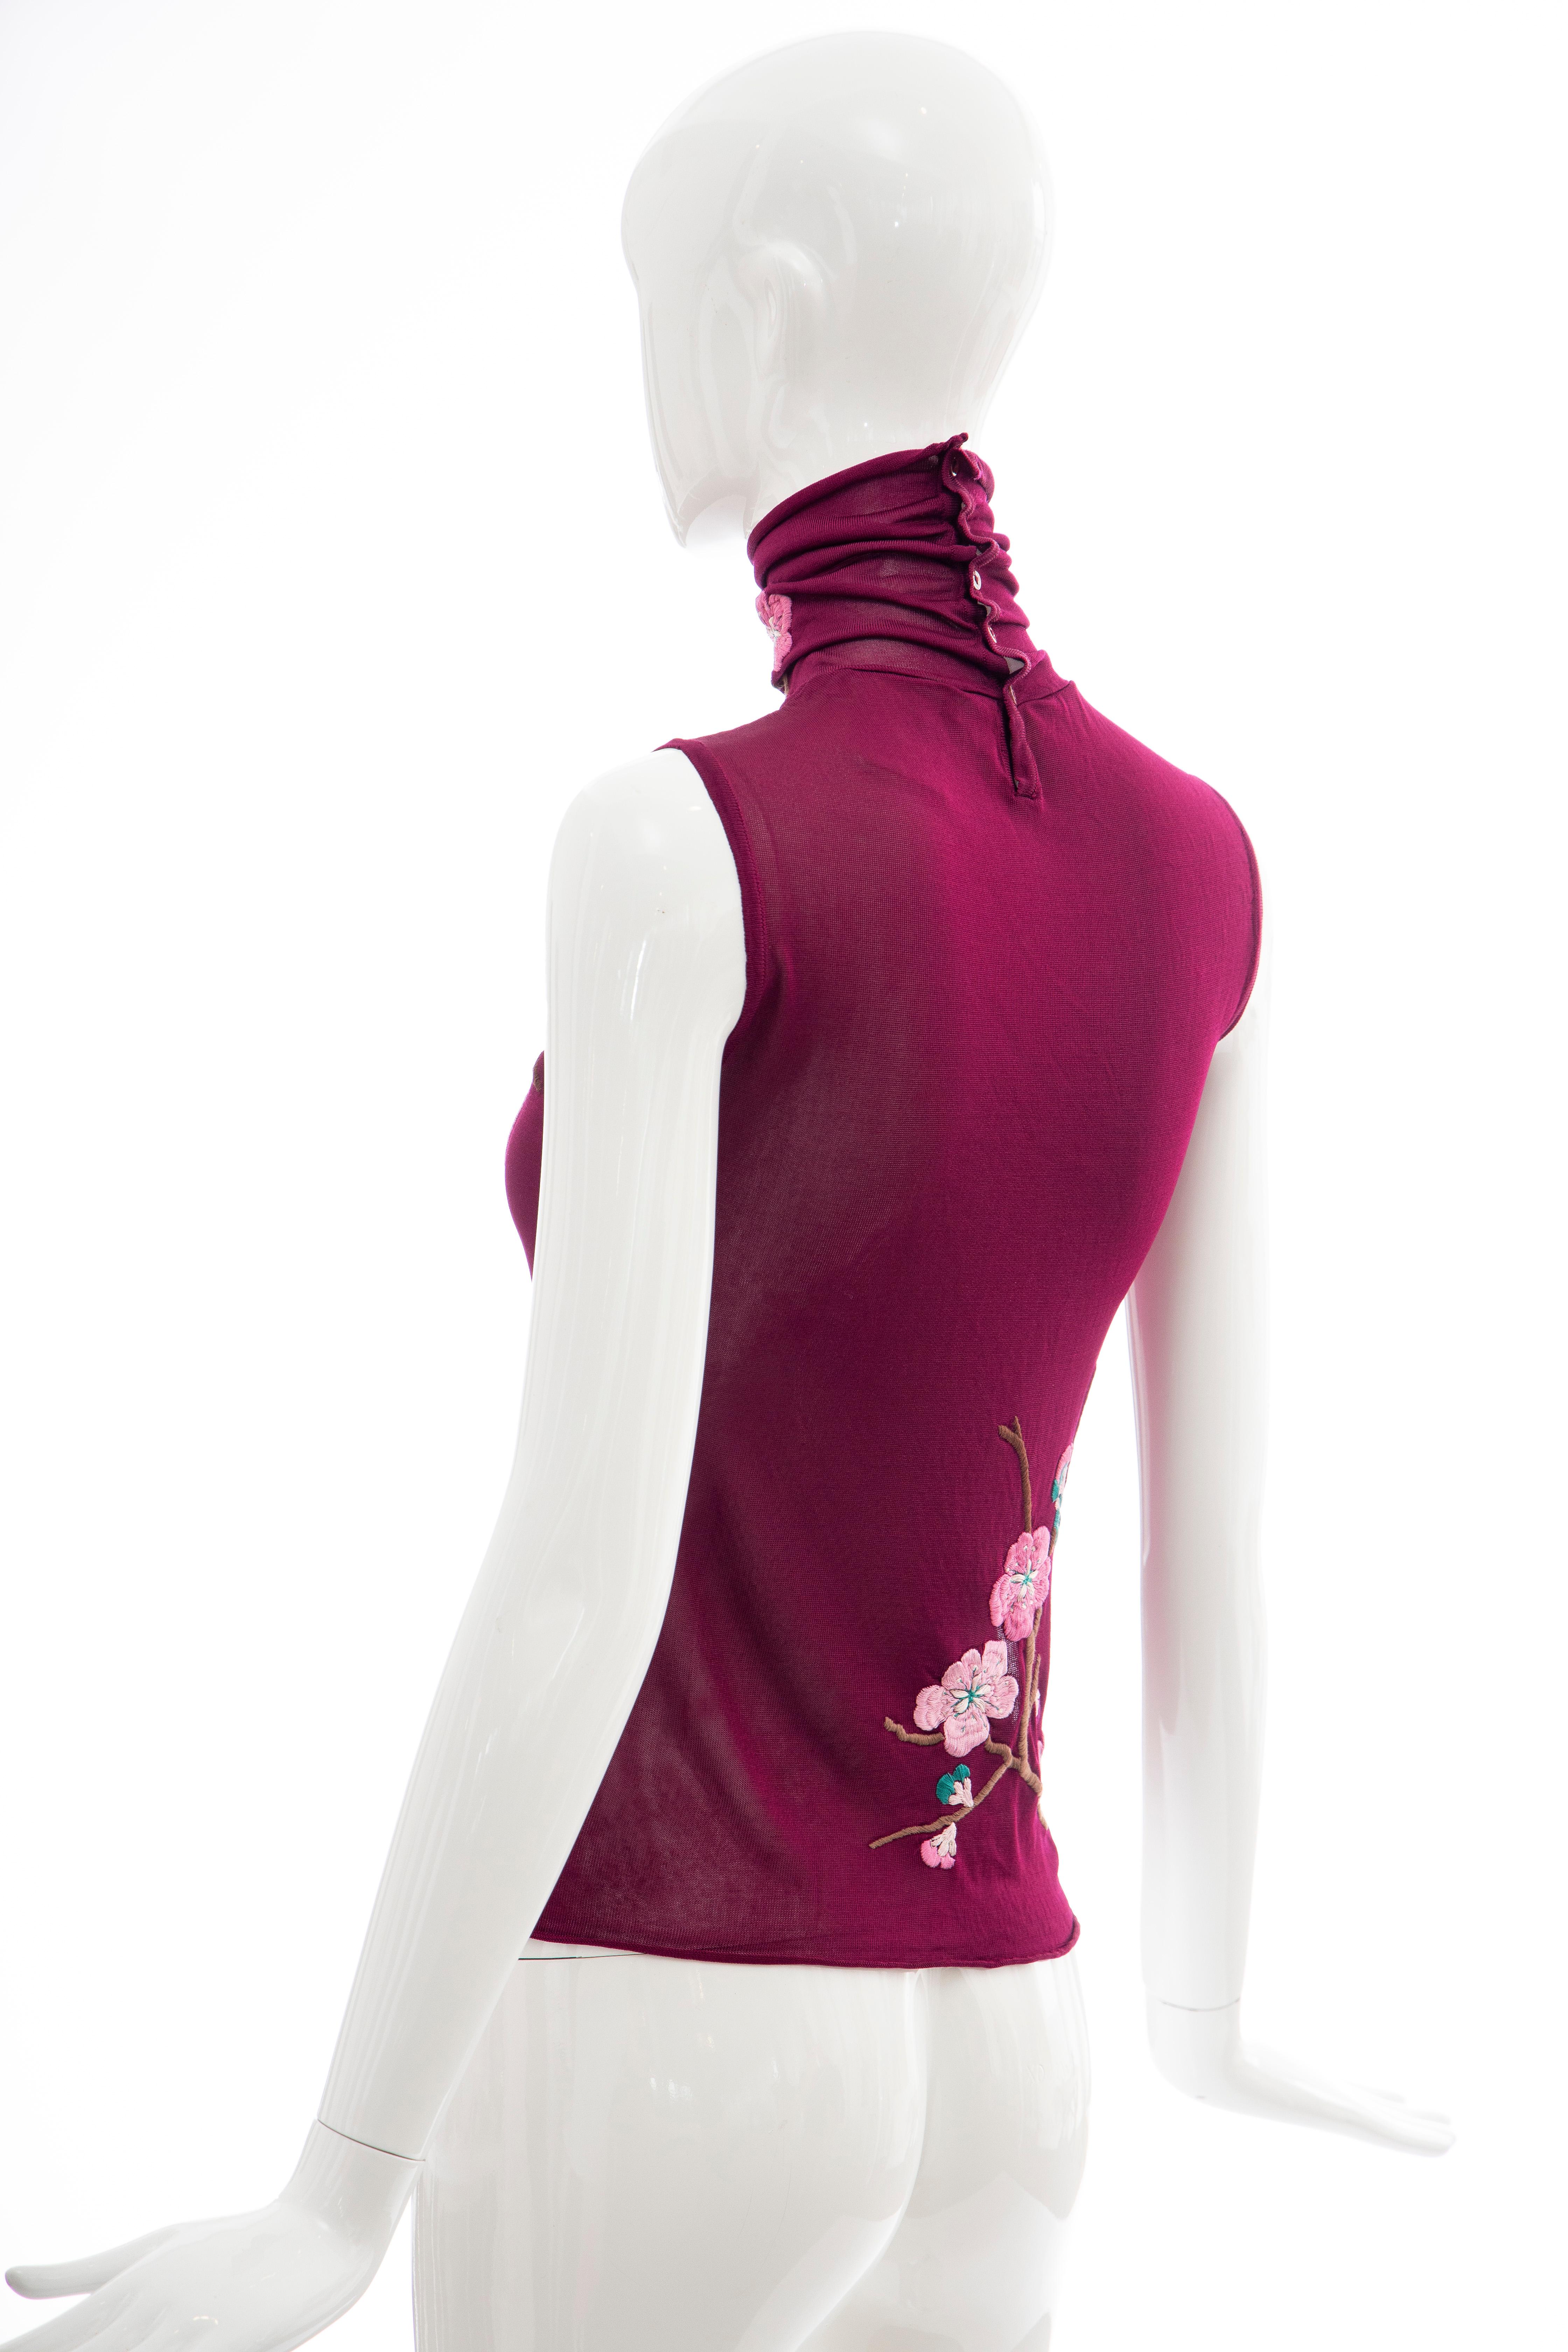 John Galliano for Christian Dior Embroidered Sleeveless Top, Fall 2003 2